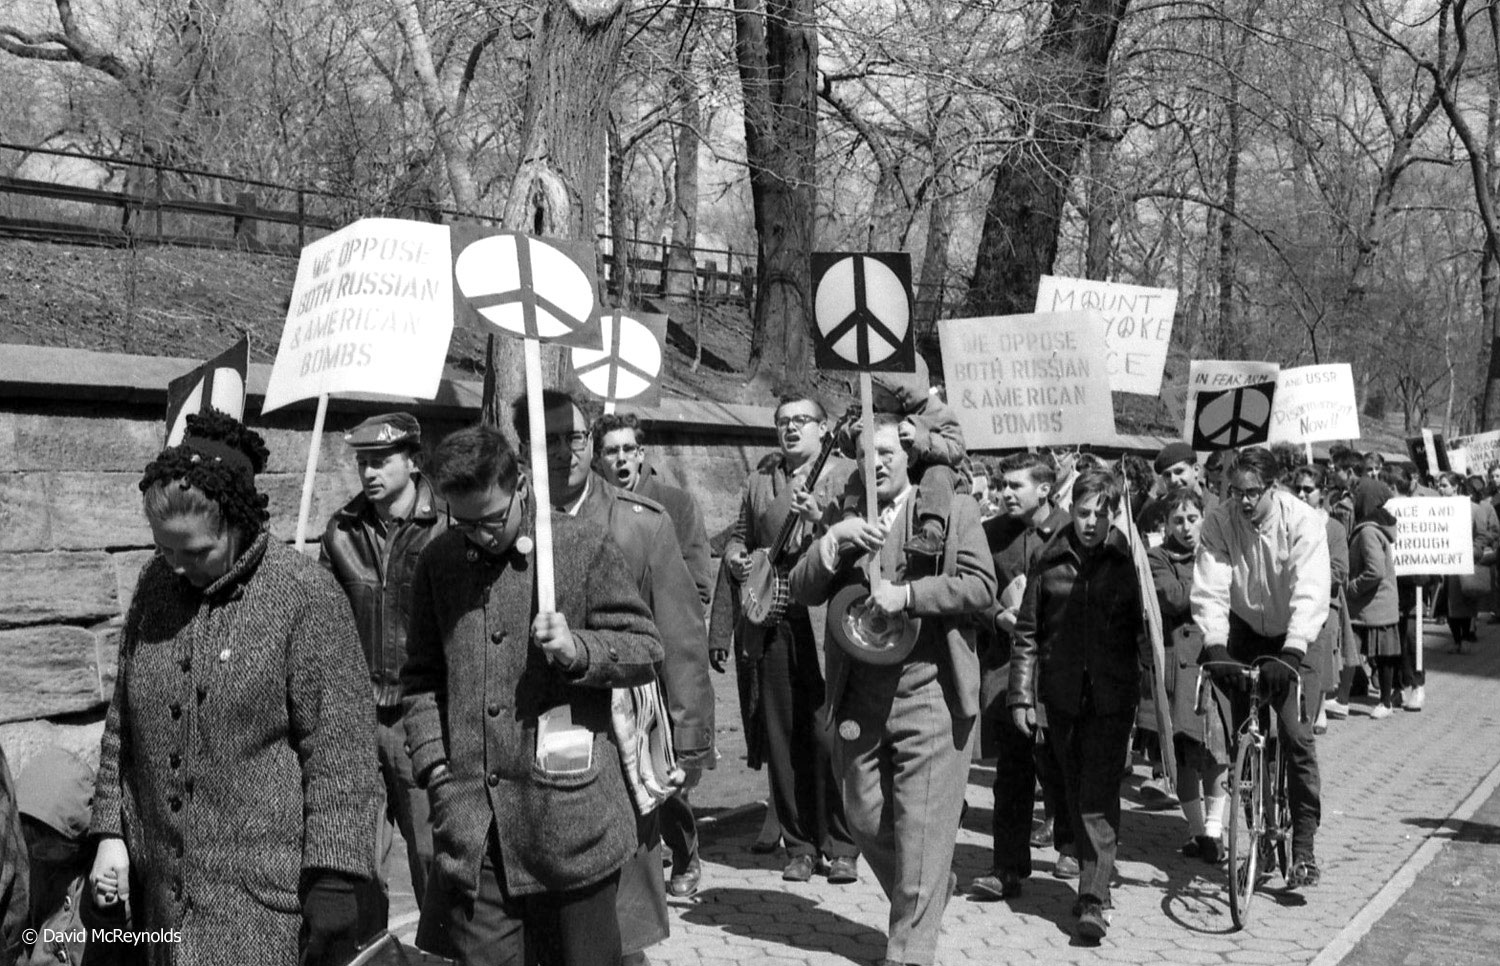  The 1961 peace walk was one of the first to feature the "ND symbol" or peace symbol, which was designed for the Aldermaston anti-nuclear walks in England. The symbol used semaphore code letters for ND for Nuclear Disarmament surrounded by a circle s